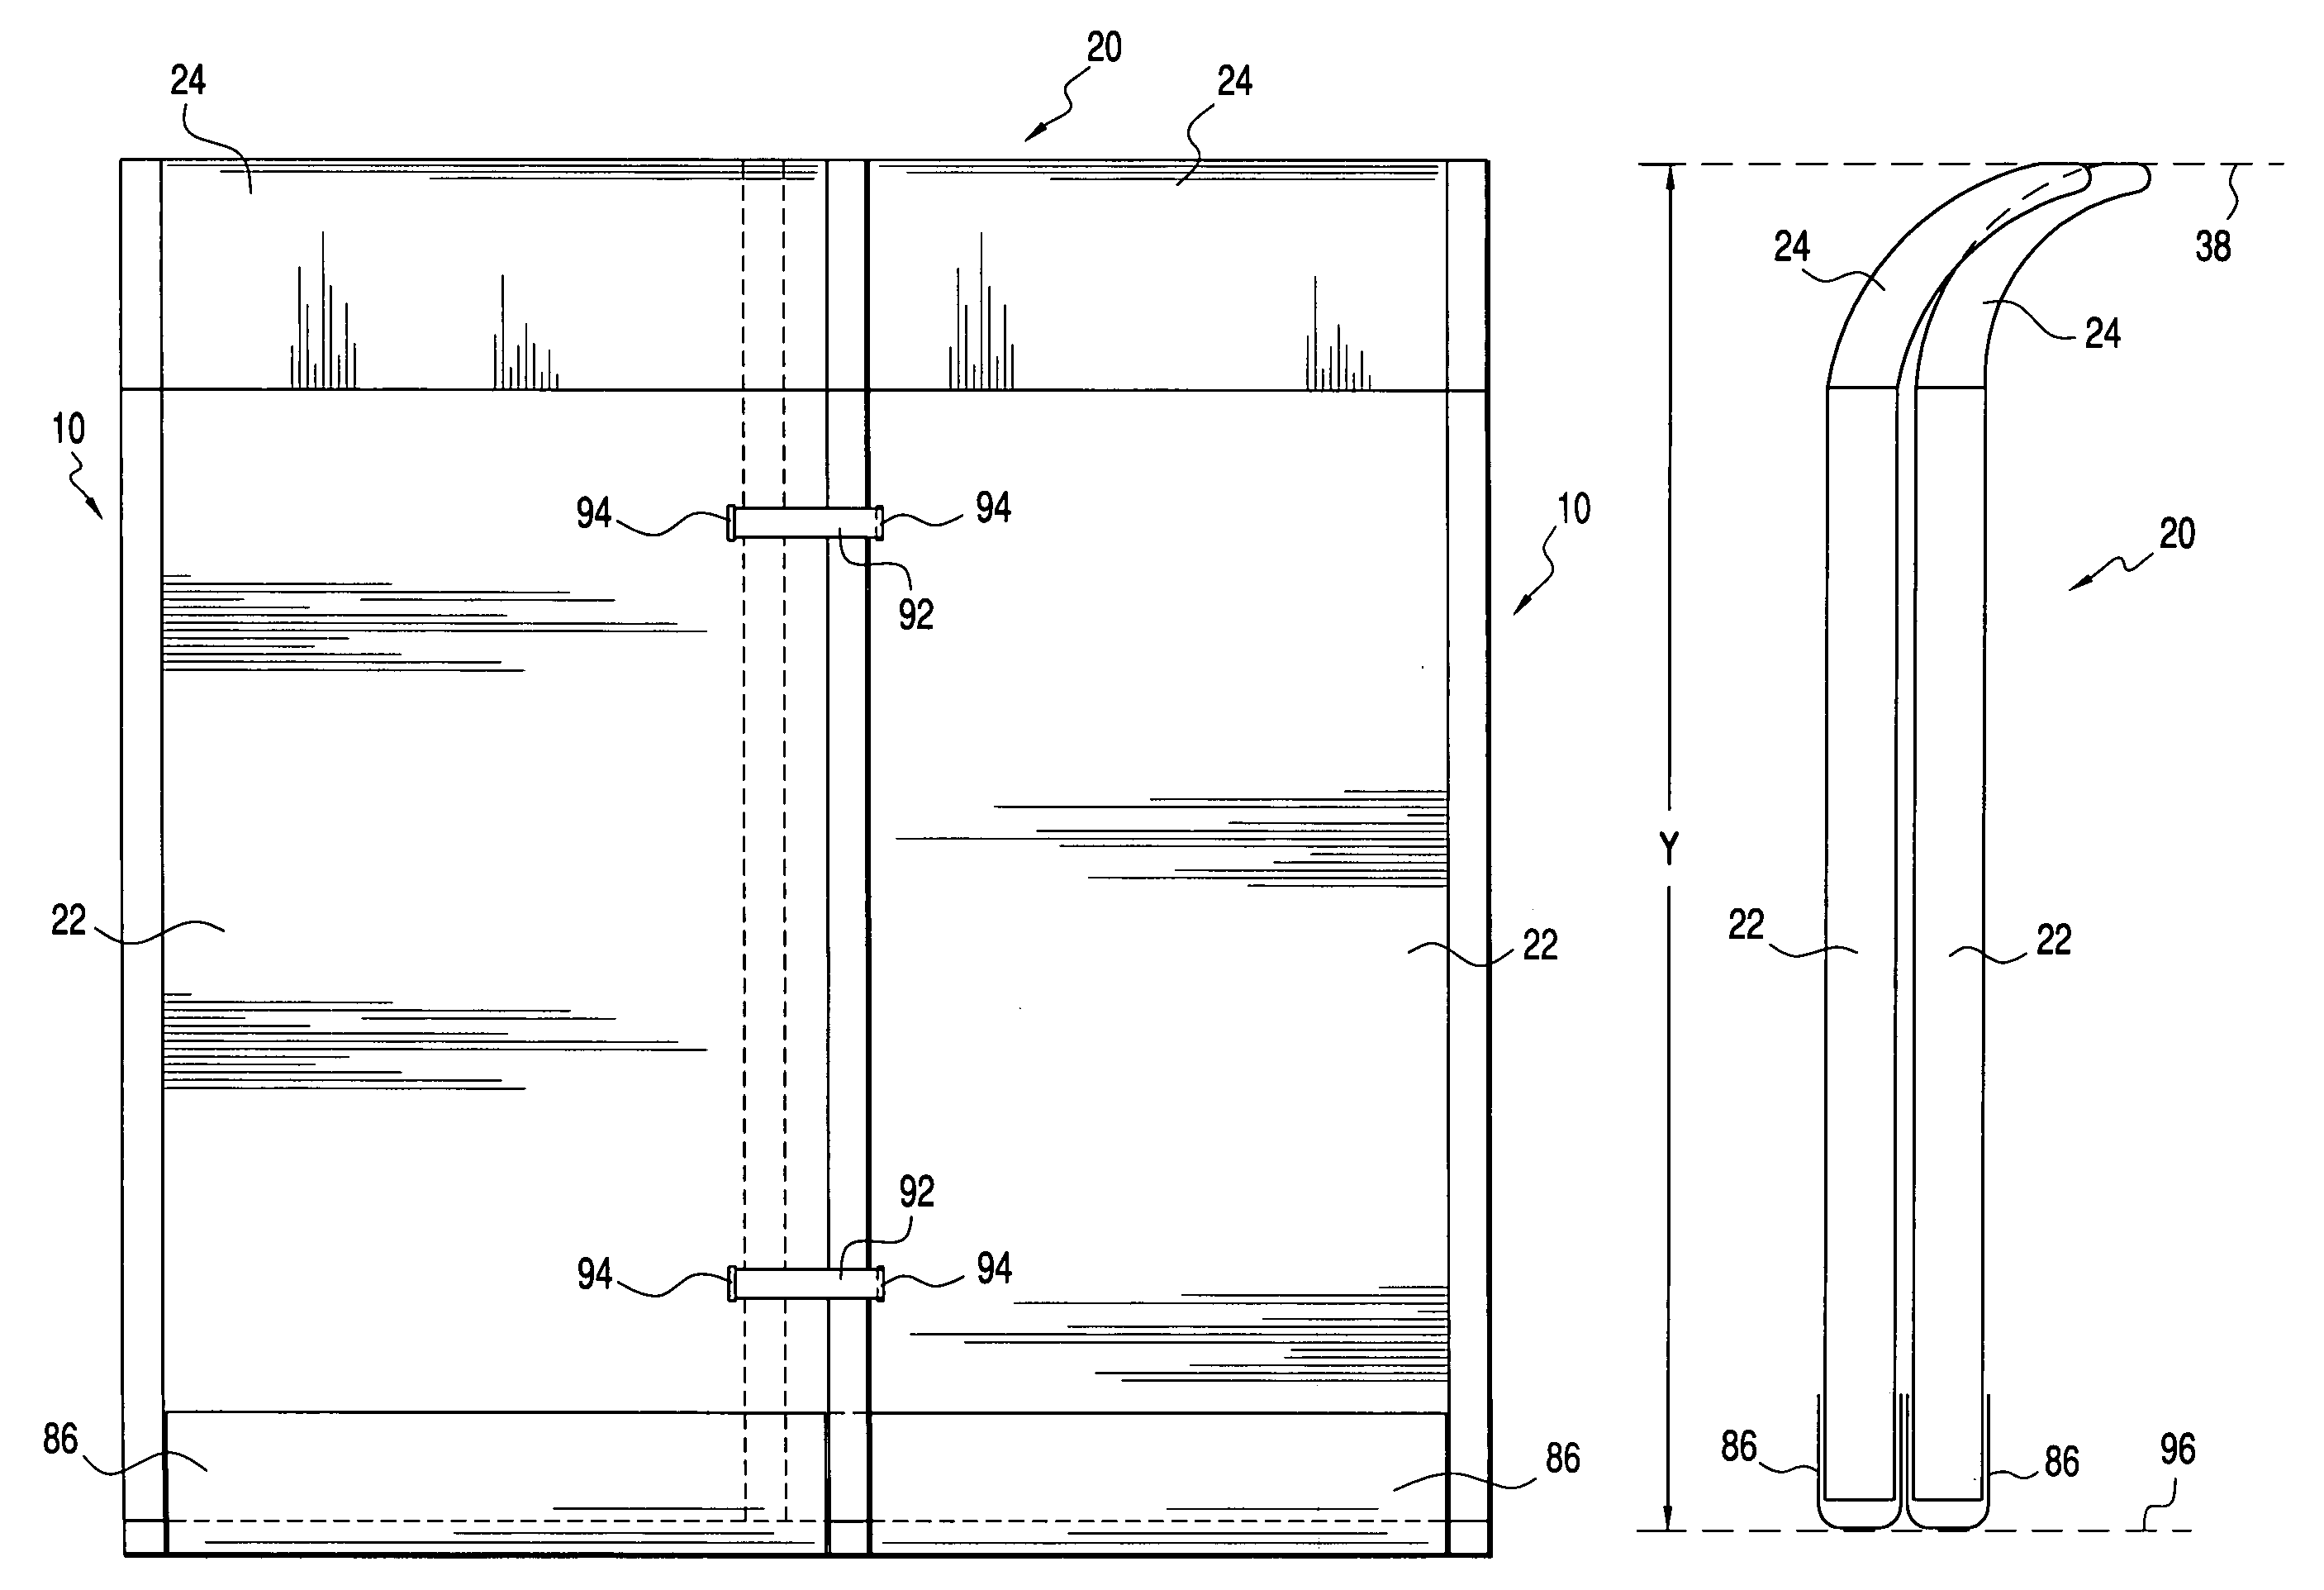 Expandable/contractible universal thermal bulkhead structure for use within refrigerated cargo containers